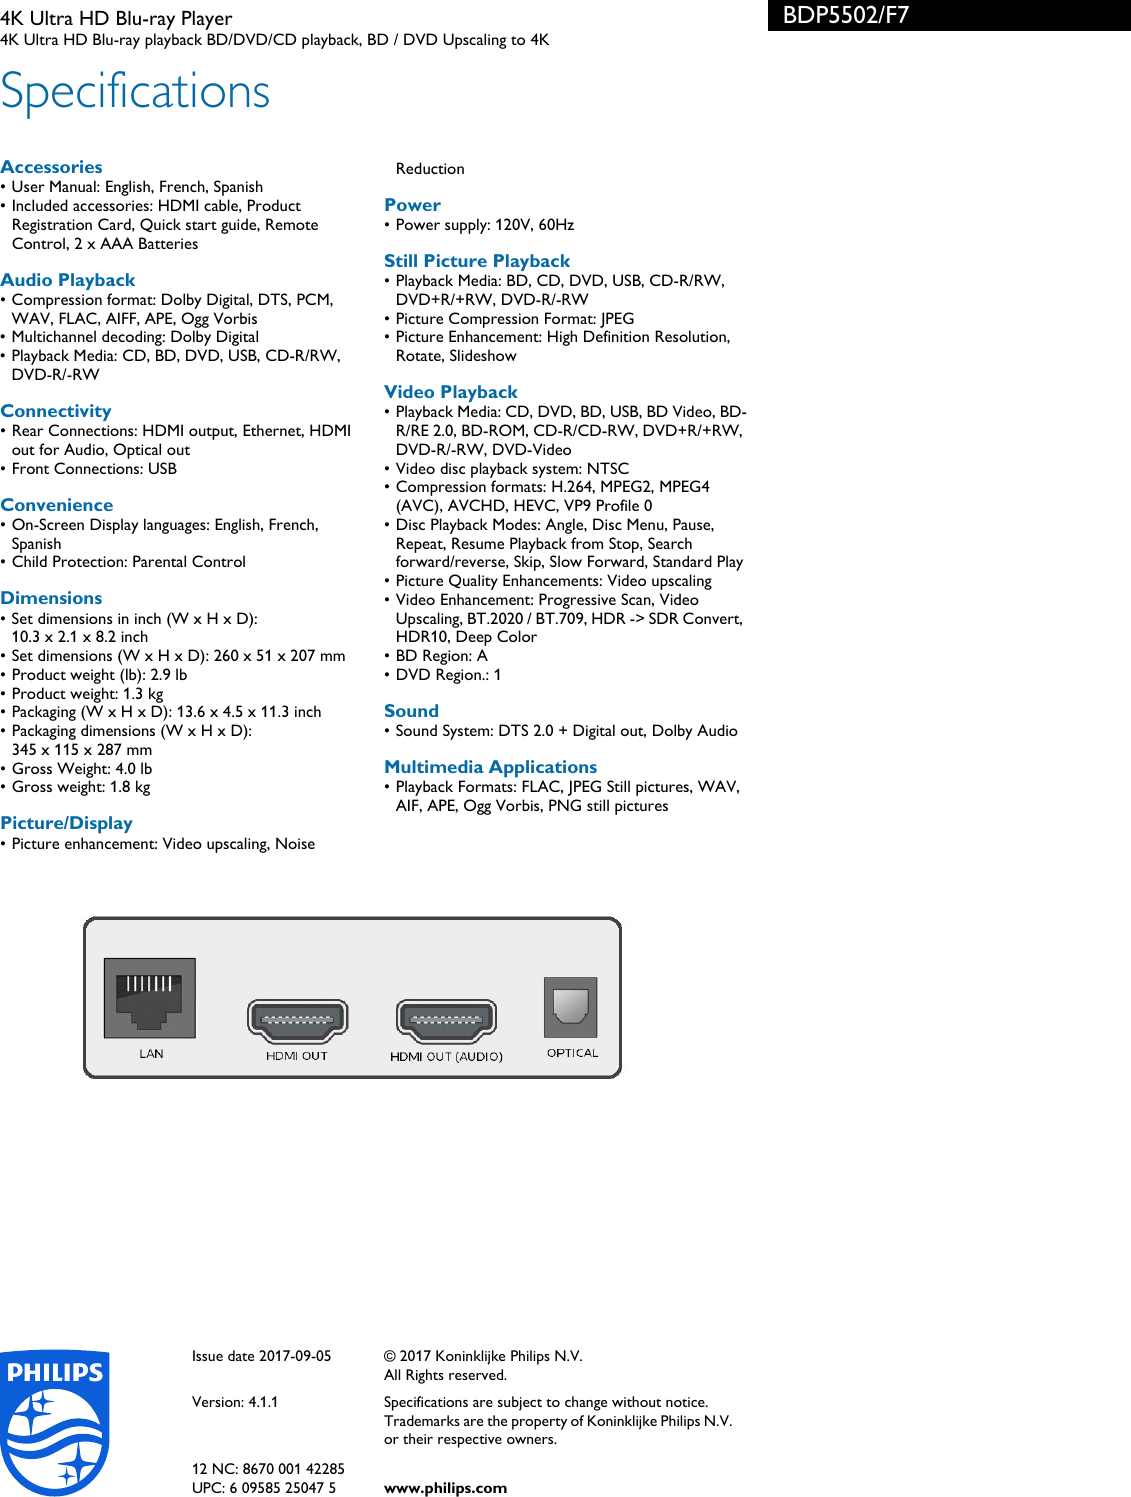 Page 3 of 3 - Philips BDP5502/F7 4K Ultra HD Blu-ray Player User Manual Leaflet Bdp5502 F7 Pss Aenus